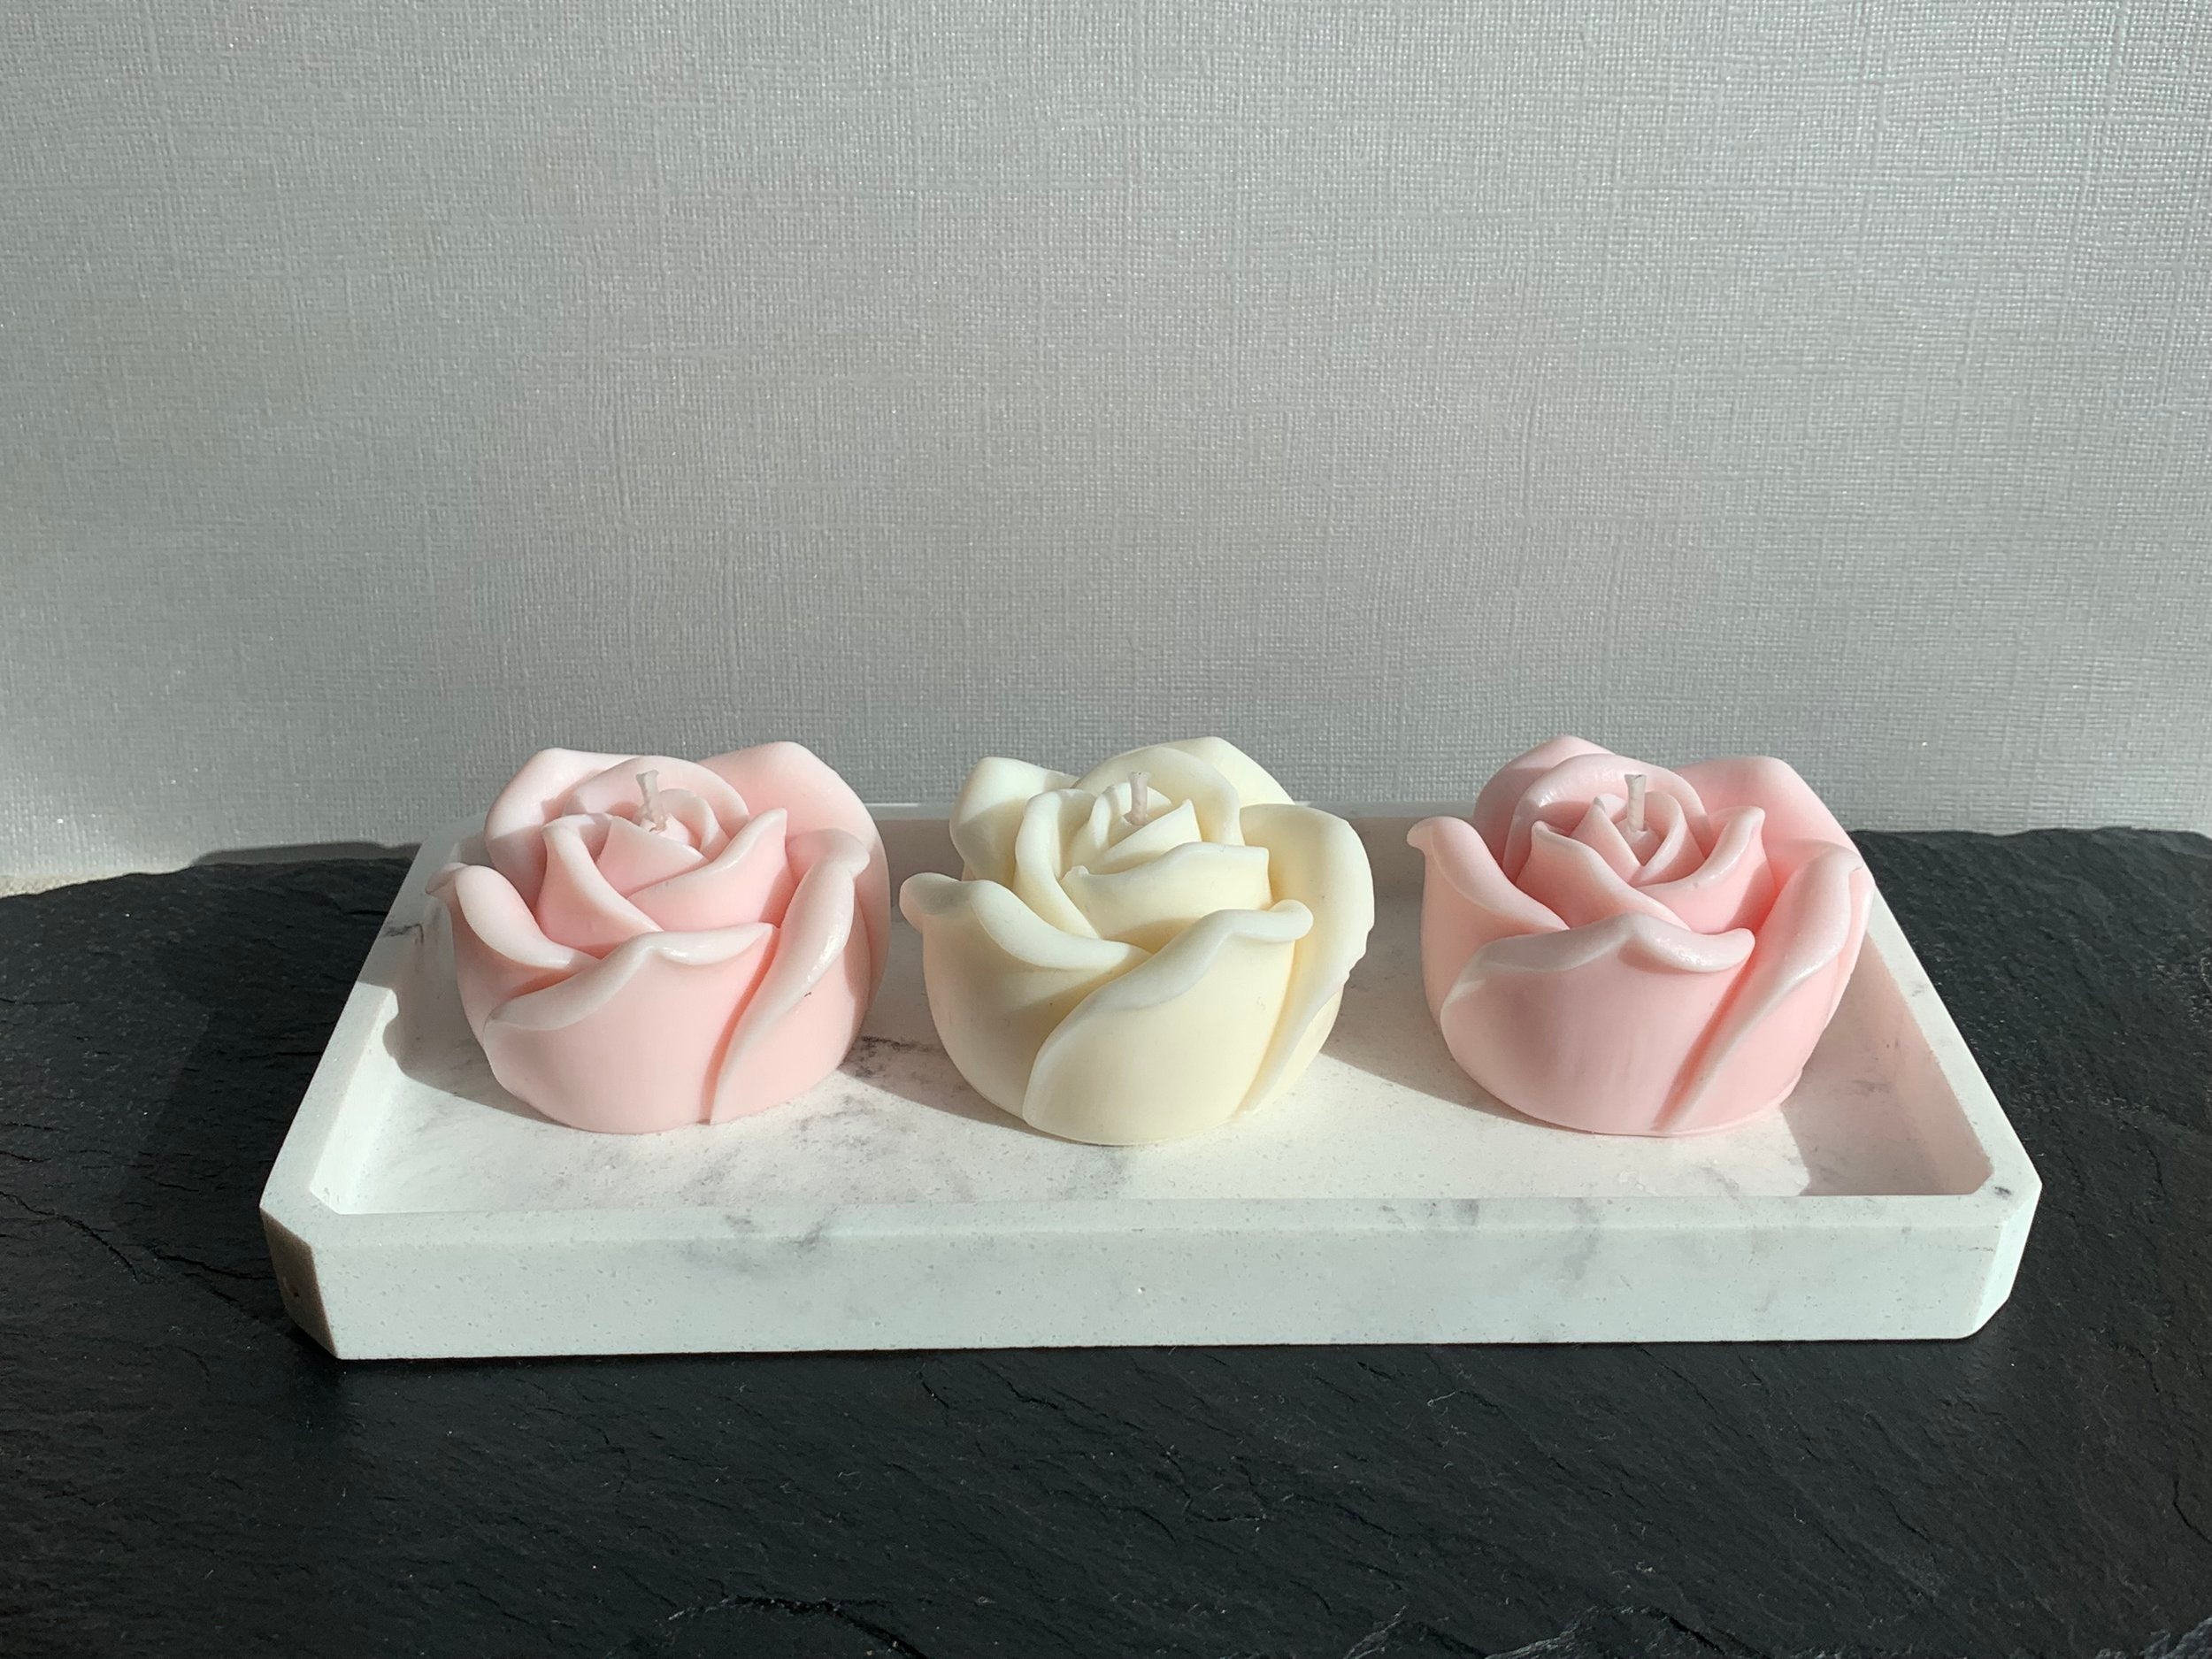 Beautiful hand made candles in the shape of delicate flowers